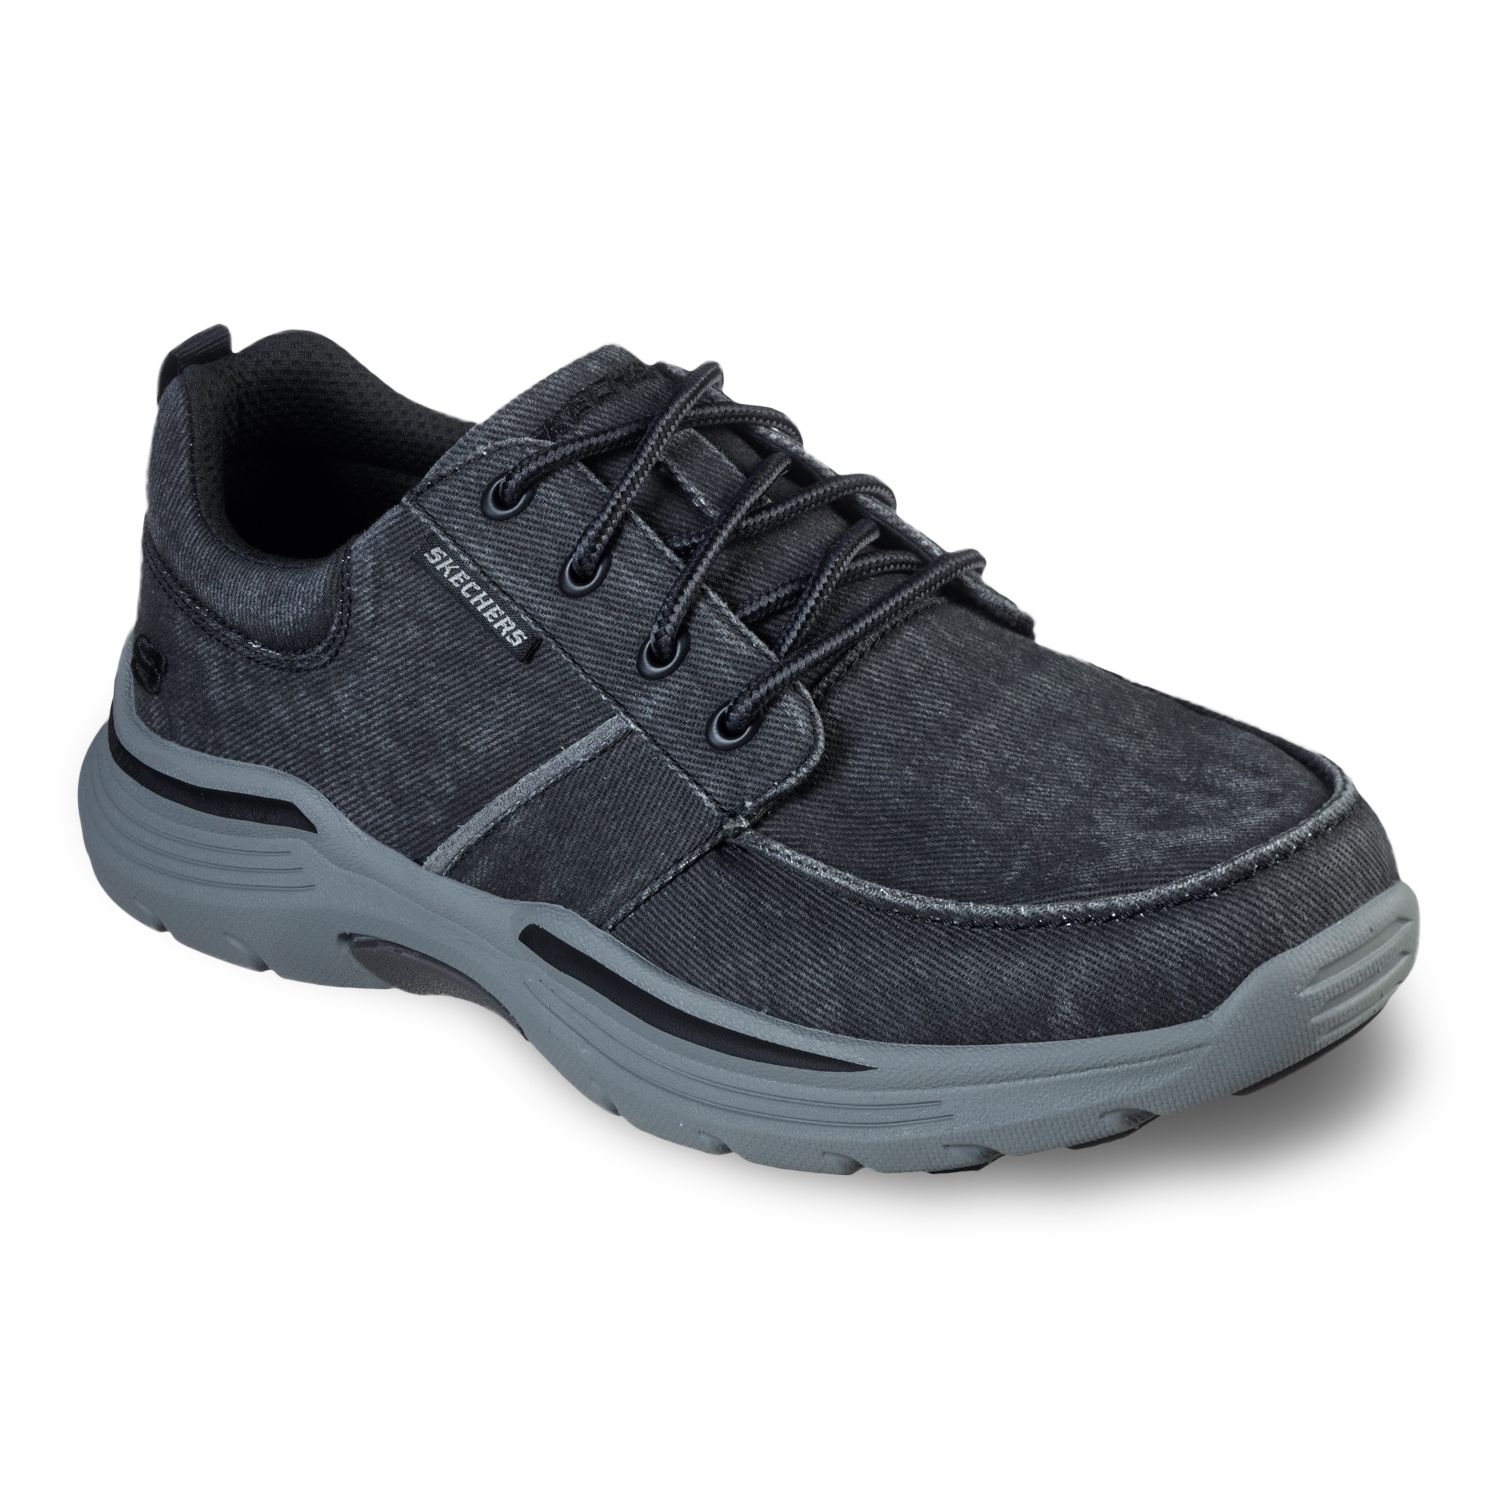 skechers relaxed fit bremo men's shoes